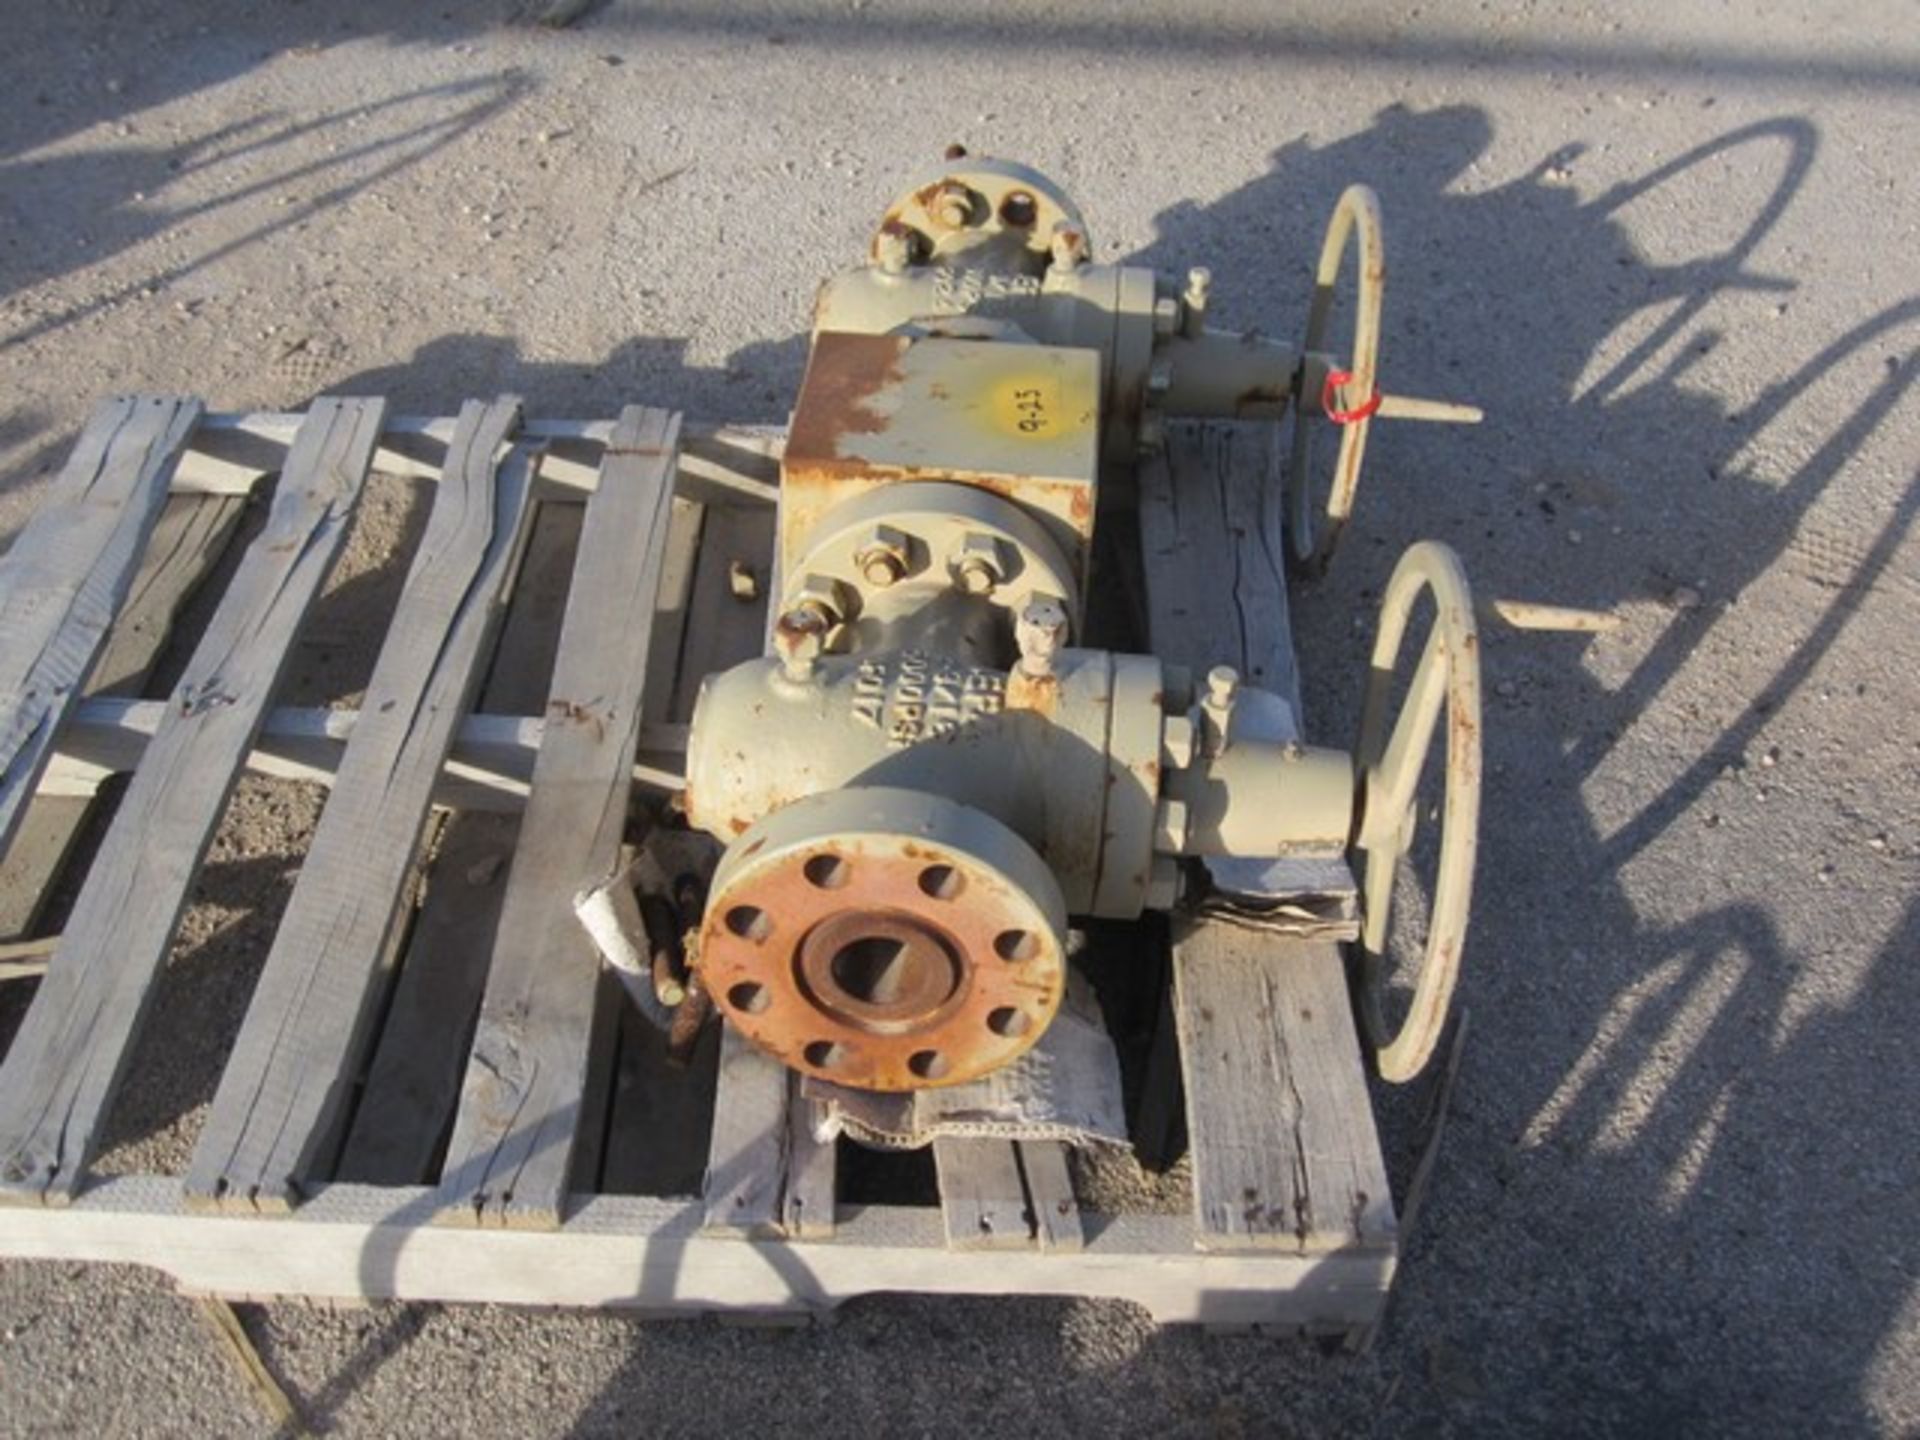 Located in YARD 9 - Odessa, TX (9-25) (2) 2-9/16" 5000# FLANGED GATE VALVES, (1) 3 WAY CCROSS (